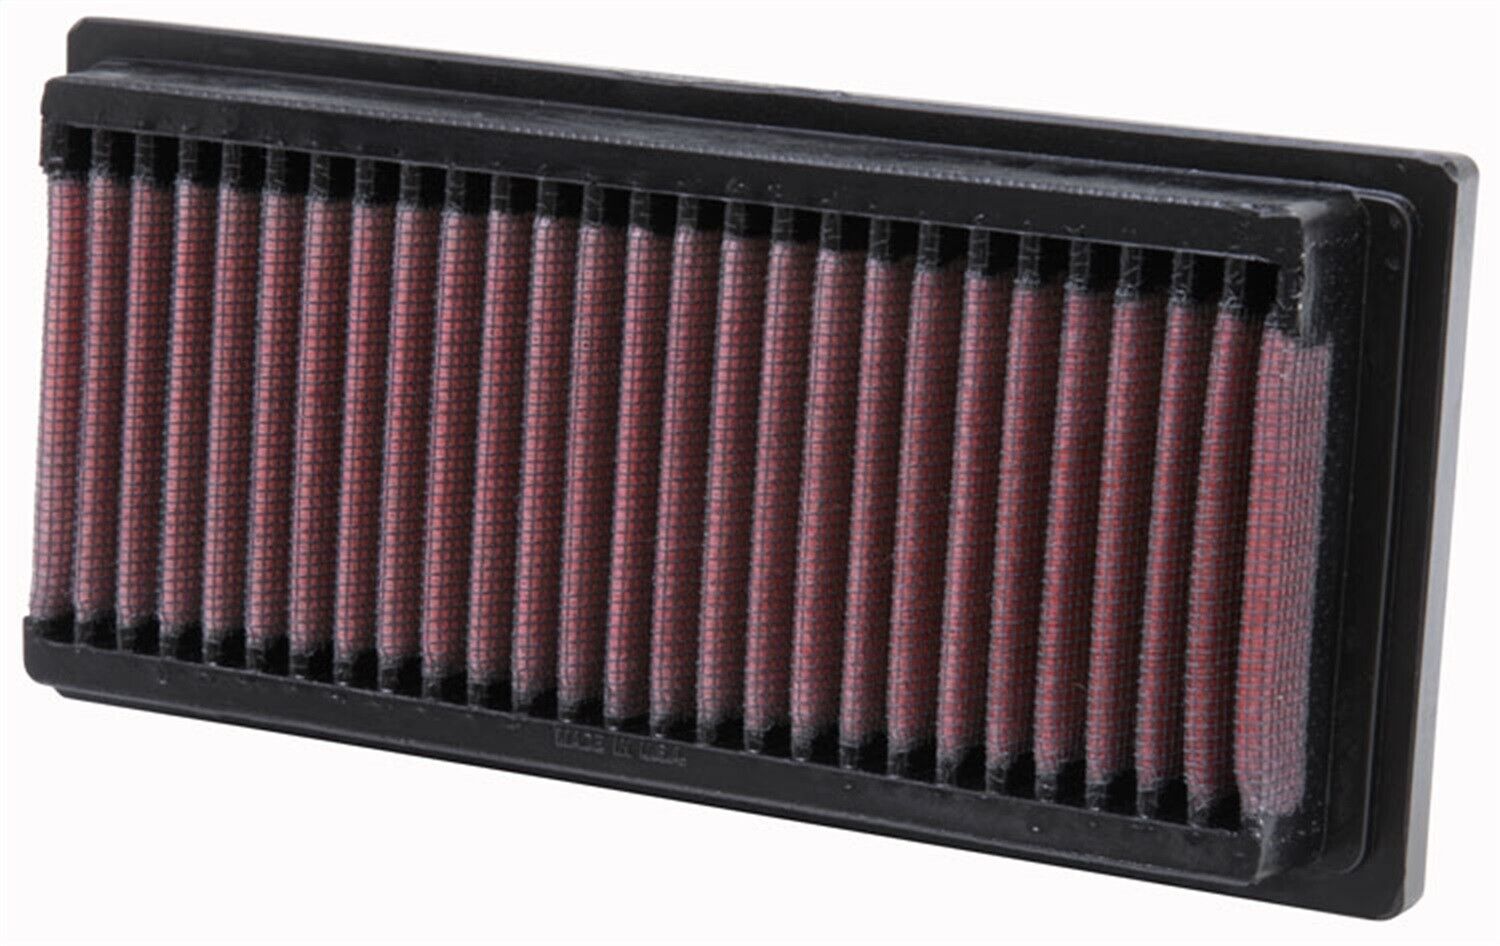 K&N Filters 33-2092 Air Filter Fits 75-93 Golf Jetta Scirocco